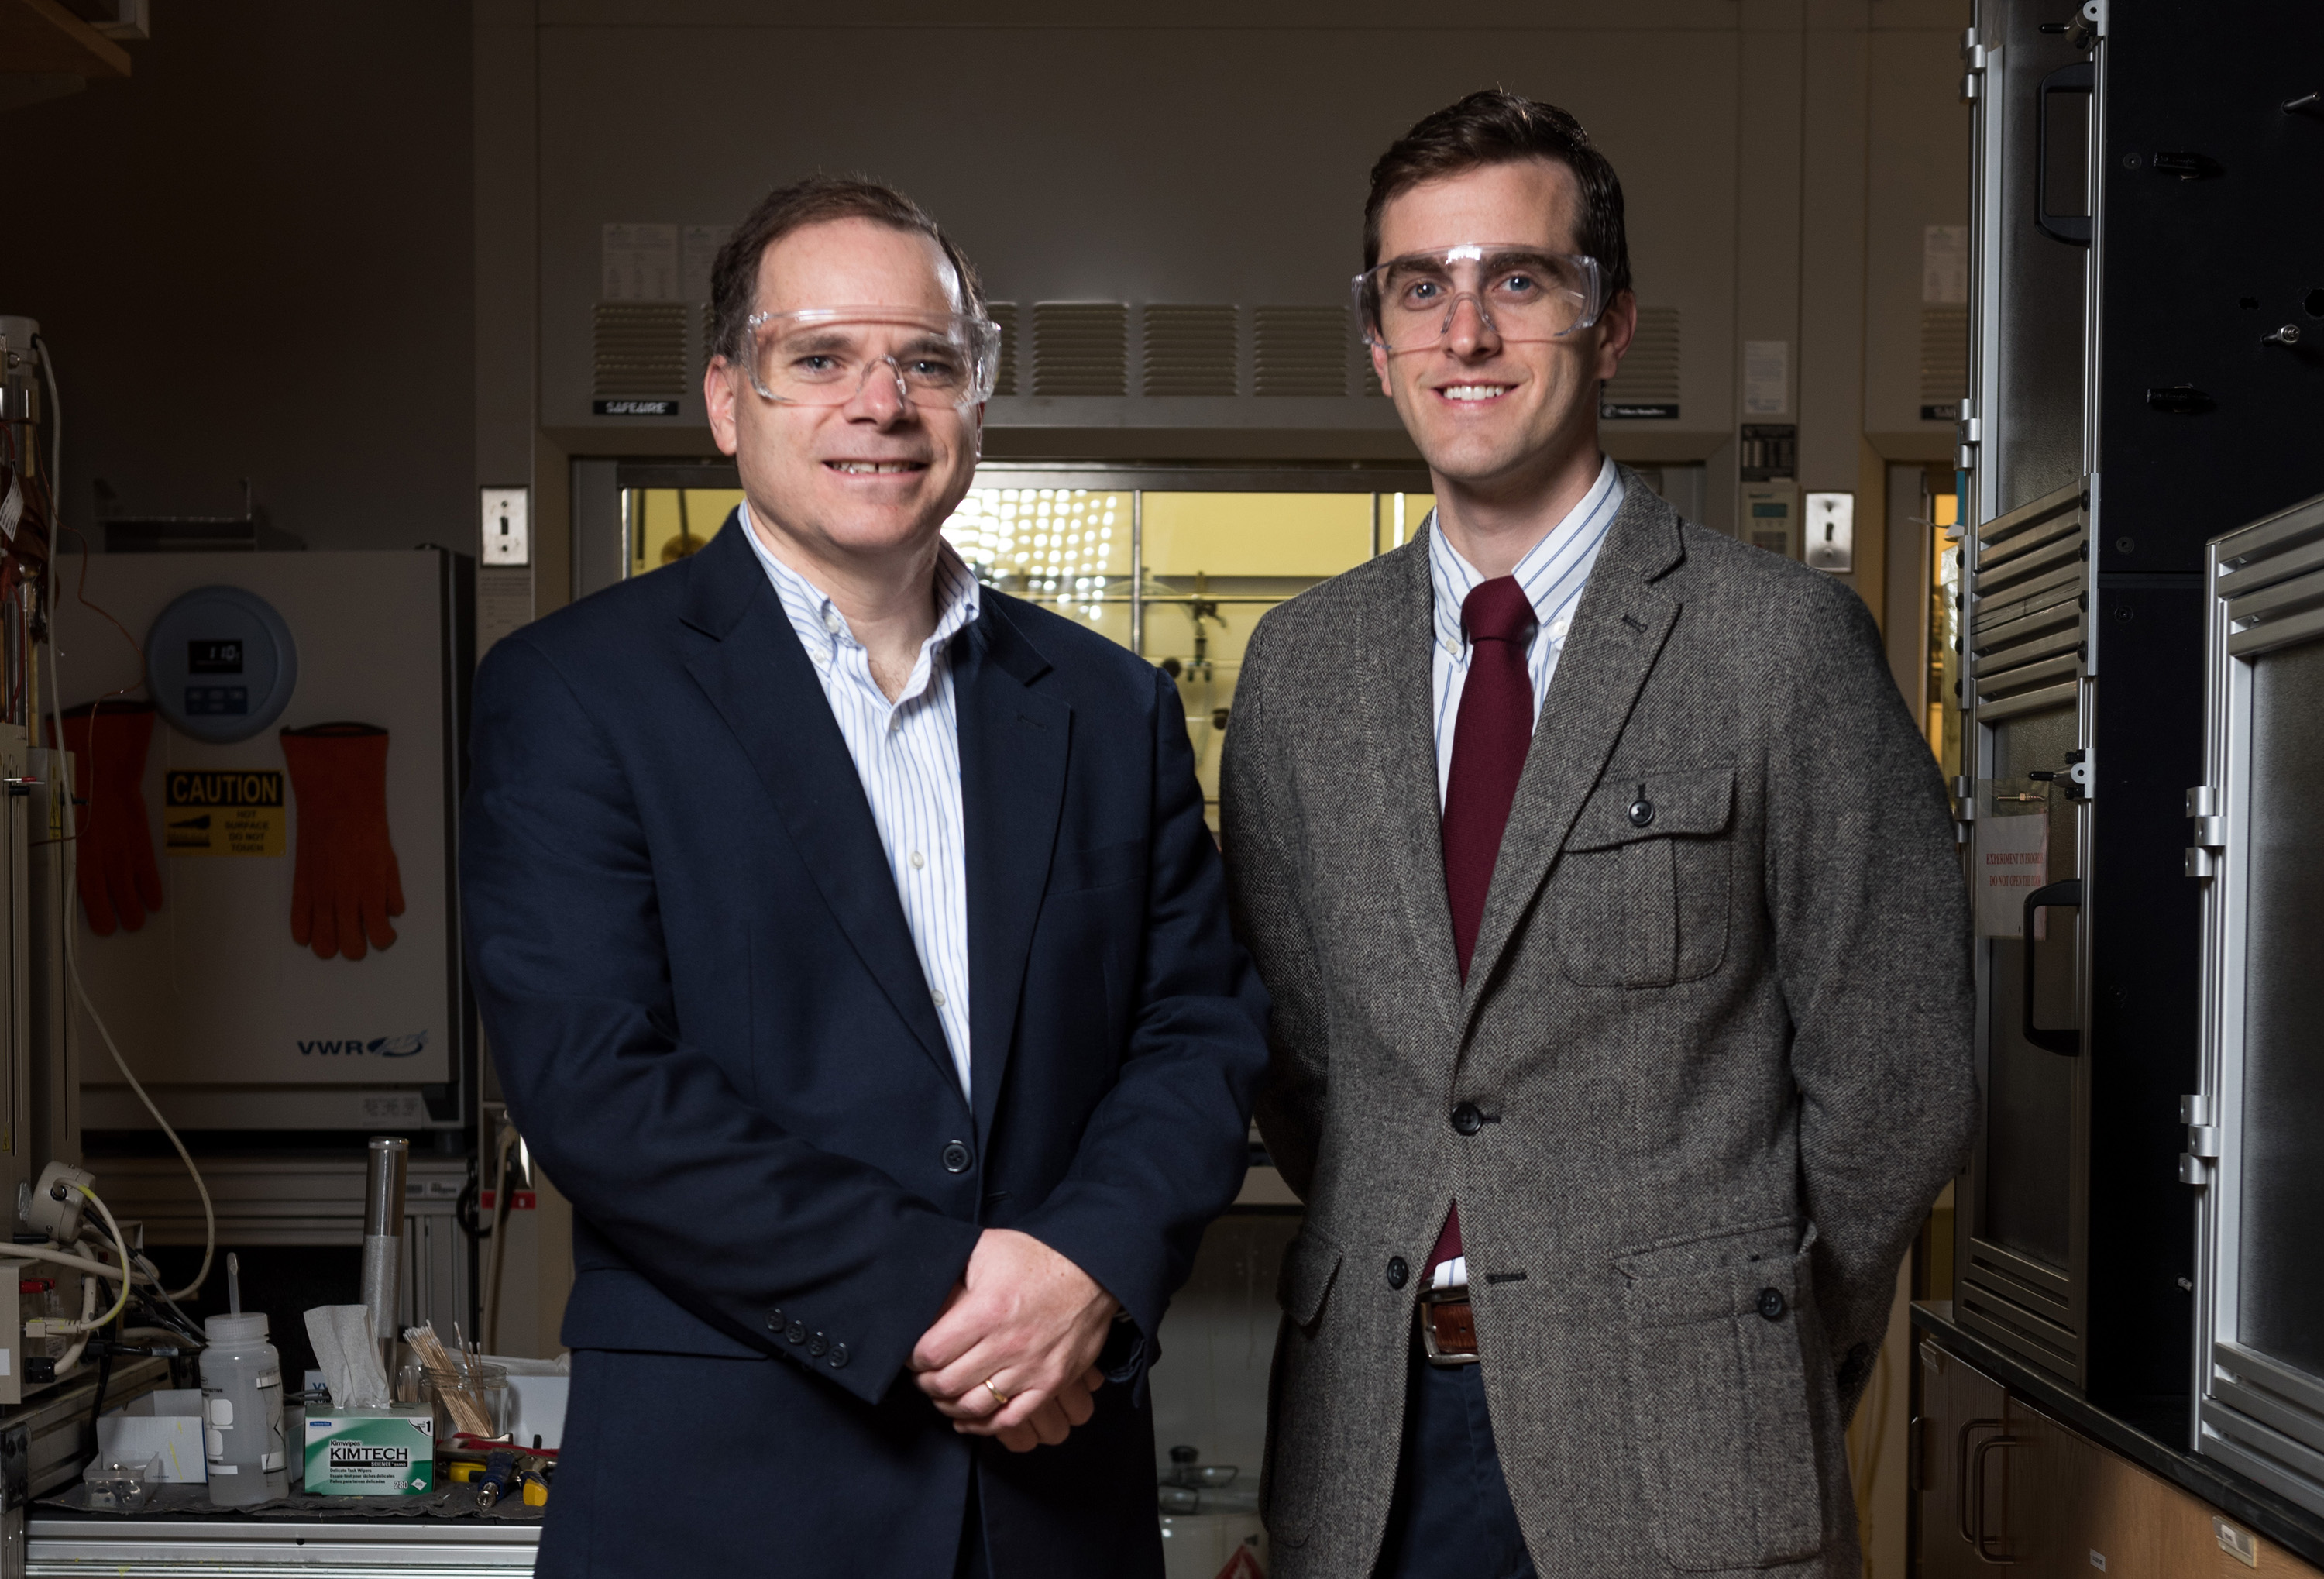 Thermally-based industrial chemical separation processes such as distillation now account for 10 to 15 percent of the world’s annual energy use. Researchers at the Georgia Institution of Technology are suggesting seven energy-intensive separation processes they believe should be the top targets for research into low-energy purification technologies. Shown are (l-r) David Sholl and Ryan Lively. (Credit: Rob Felt, Georgia Tech)